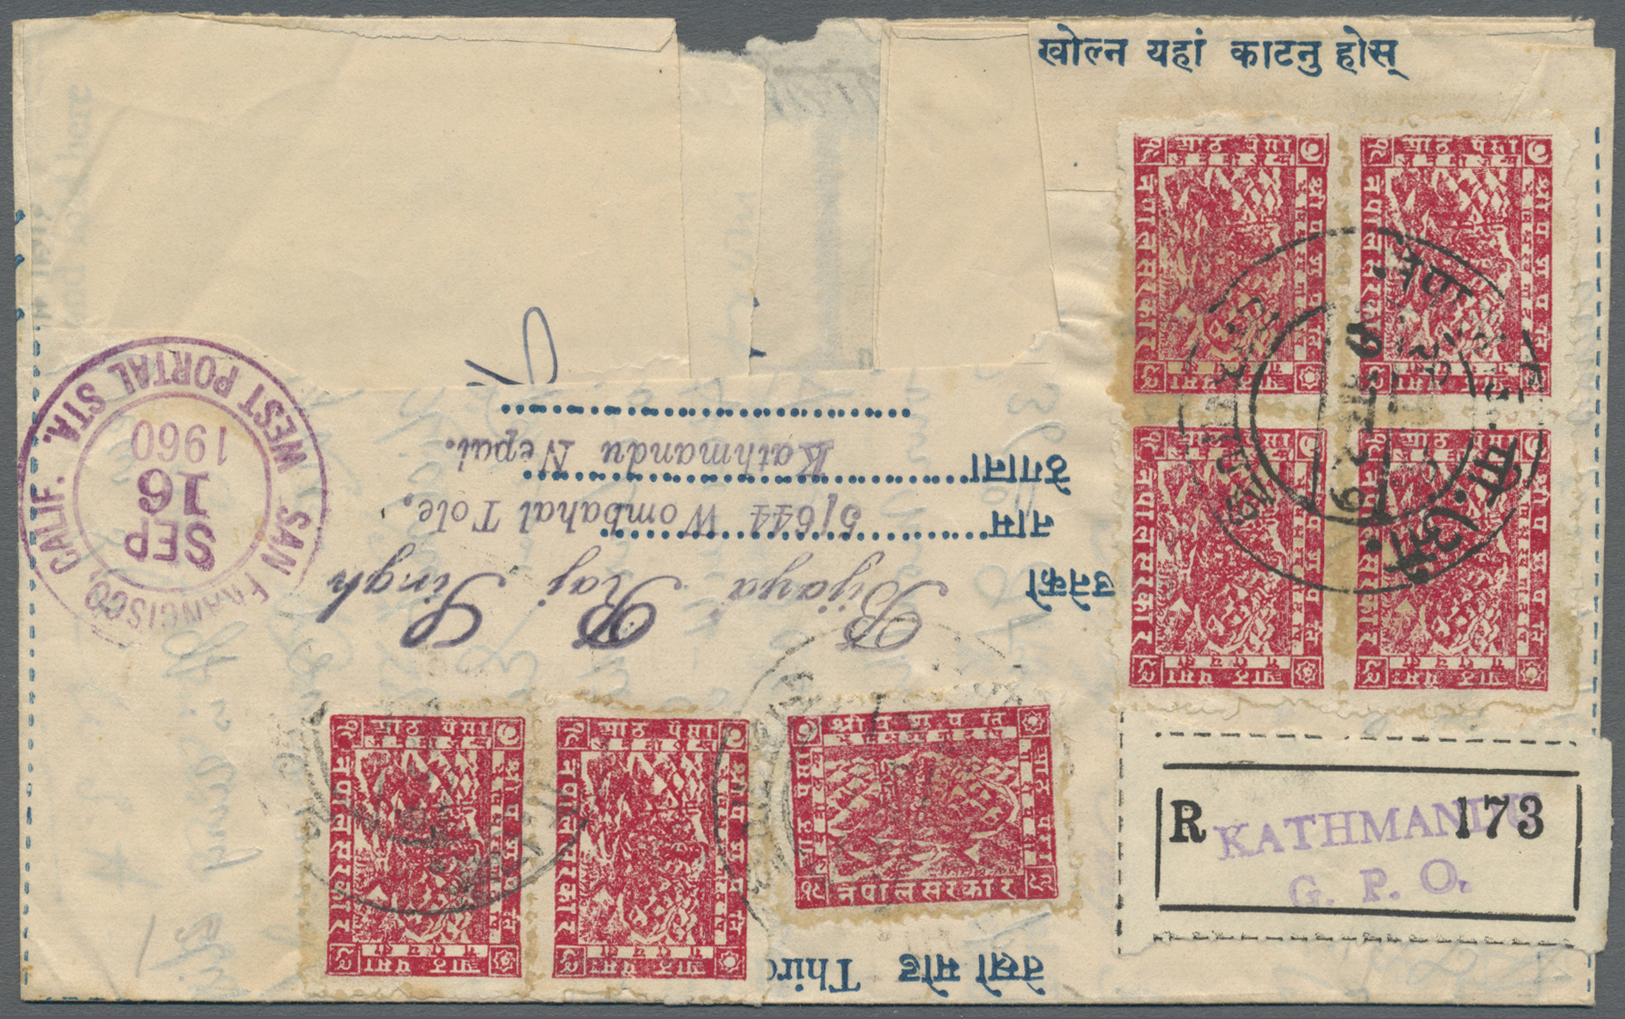 GA Nepal: 1959 First Aerogramme 8p. Blue, Fourth Printing (address Lines Widely Spaced), With "ROHTAS BOND" Watermark, U - Nepal